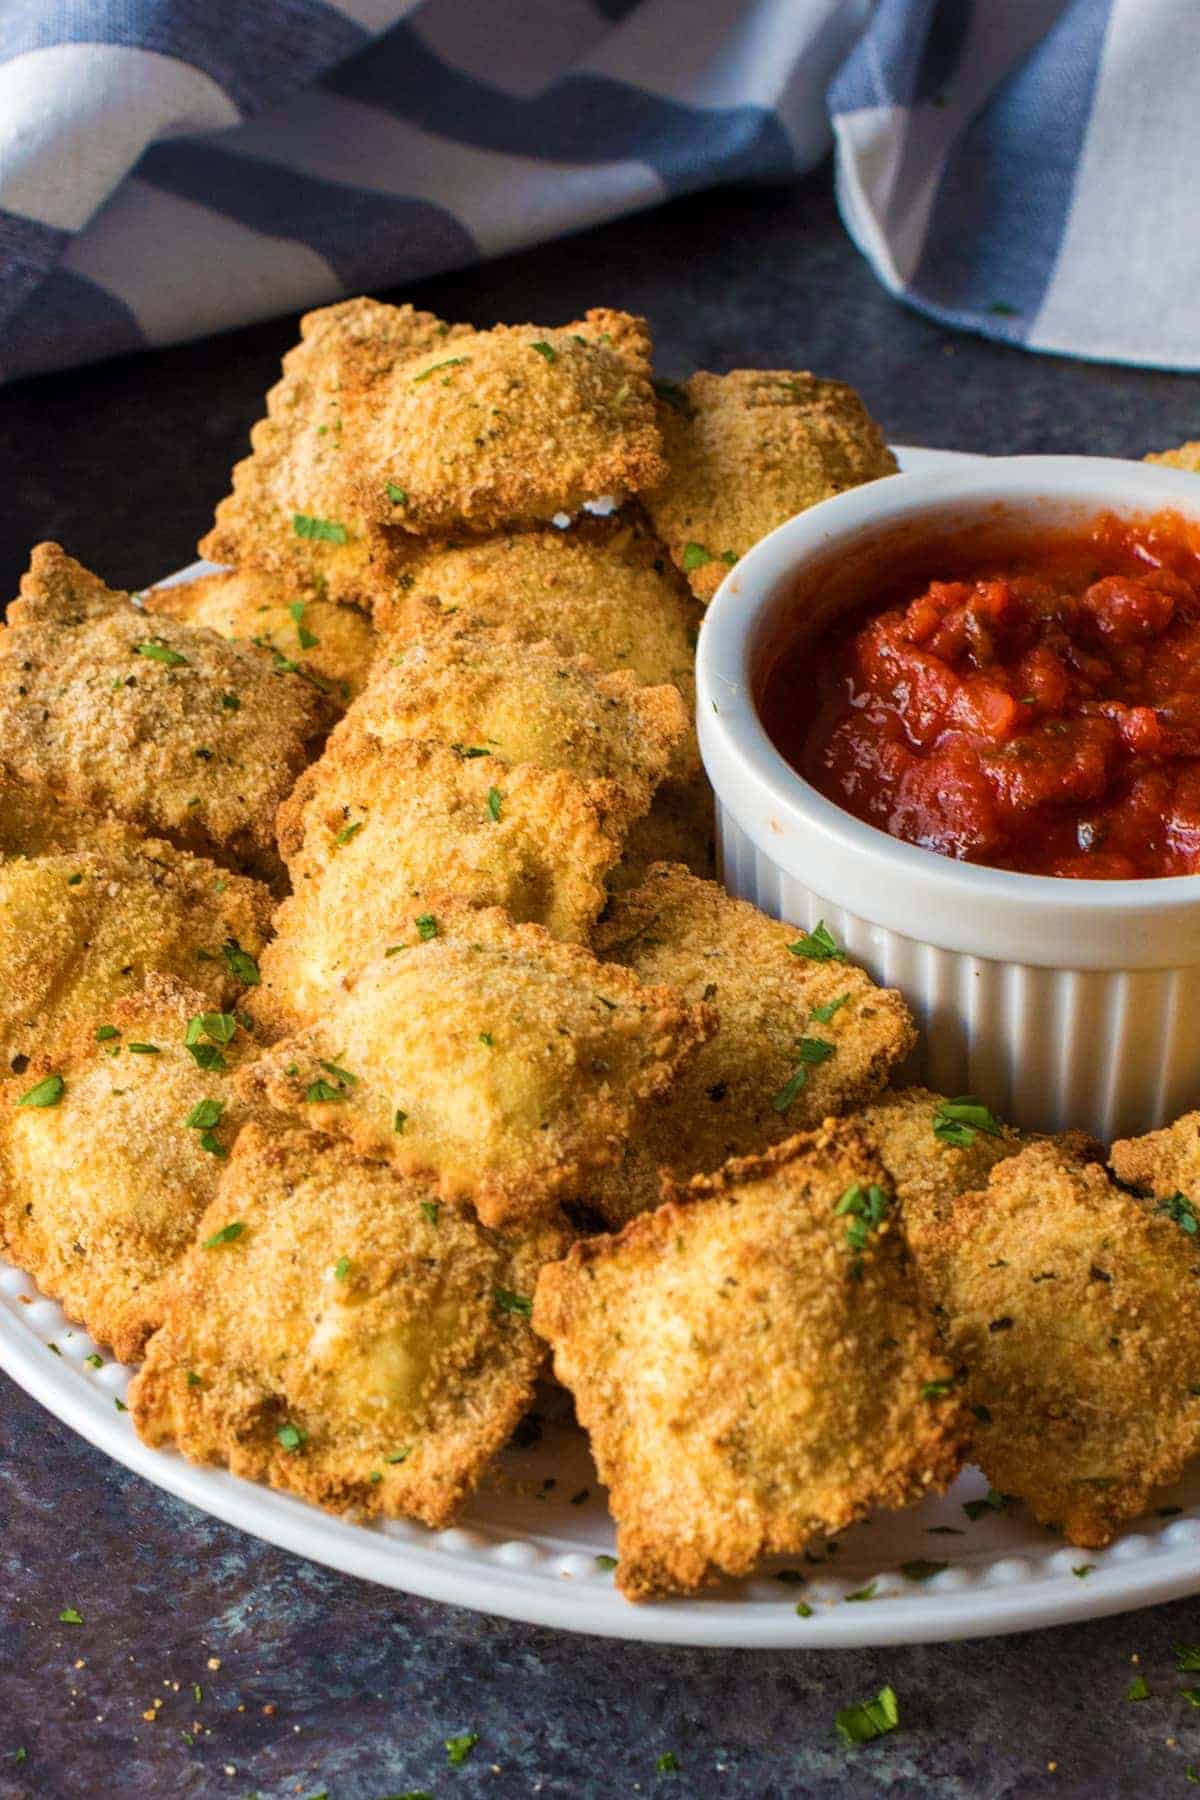 Toasted ravioli rolled in bread crumbs and piled next to marinara dipping sauce for serving.